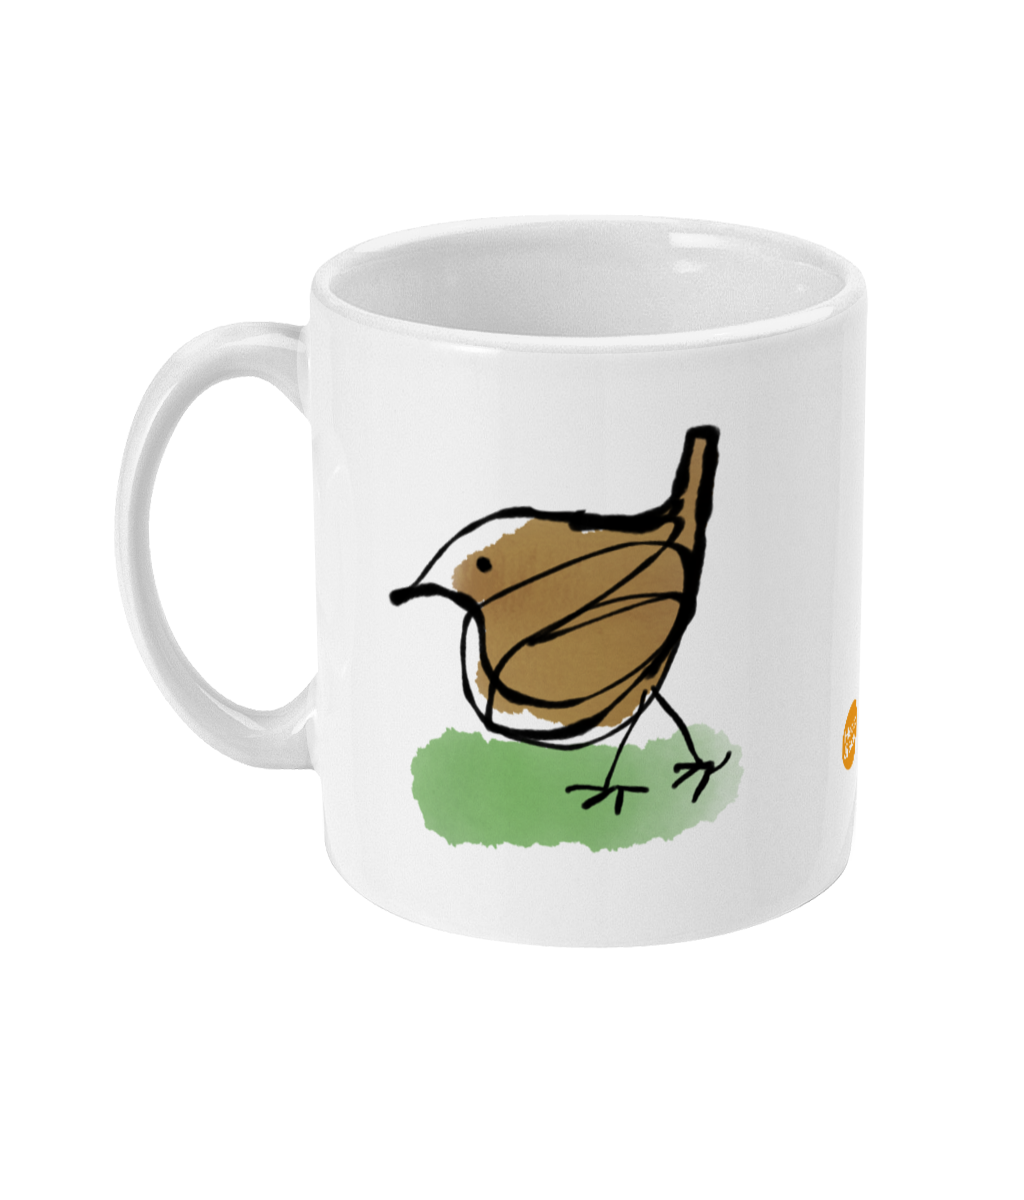 Little Jenny Wren design coffee mug by Hector and Bone Left View